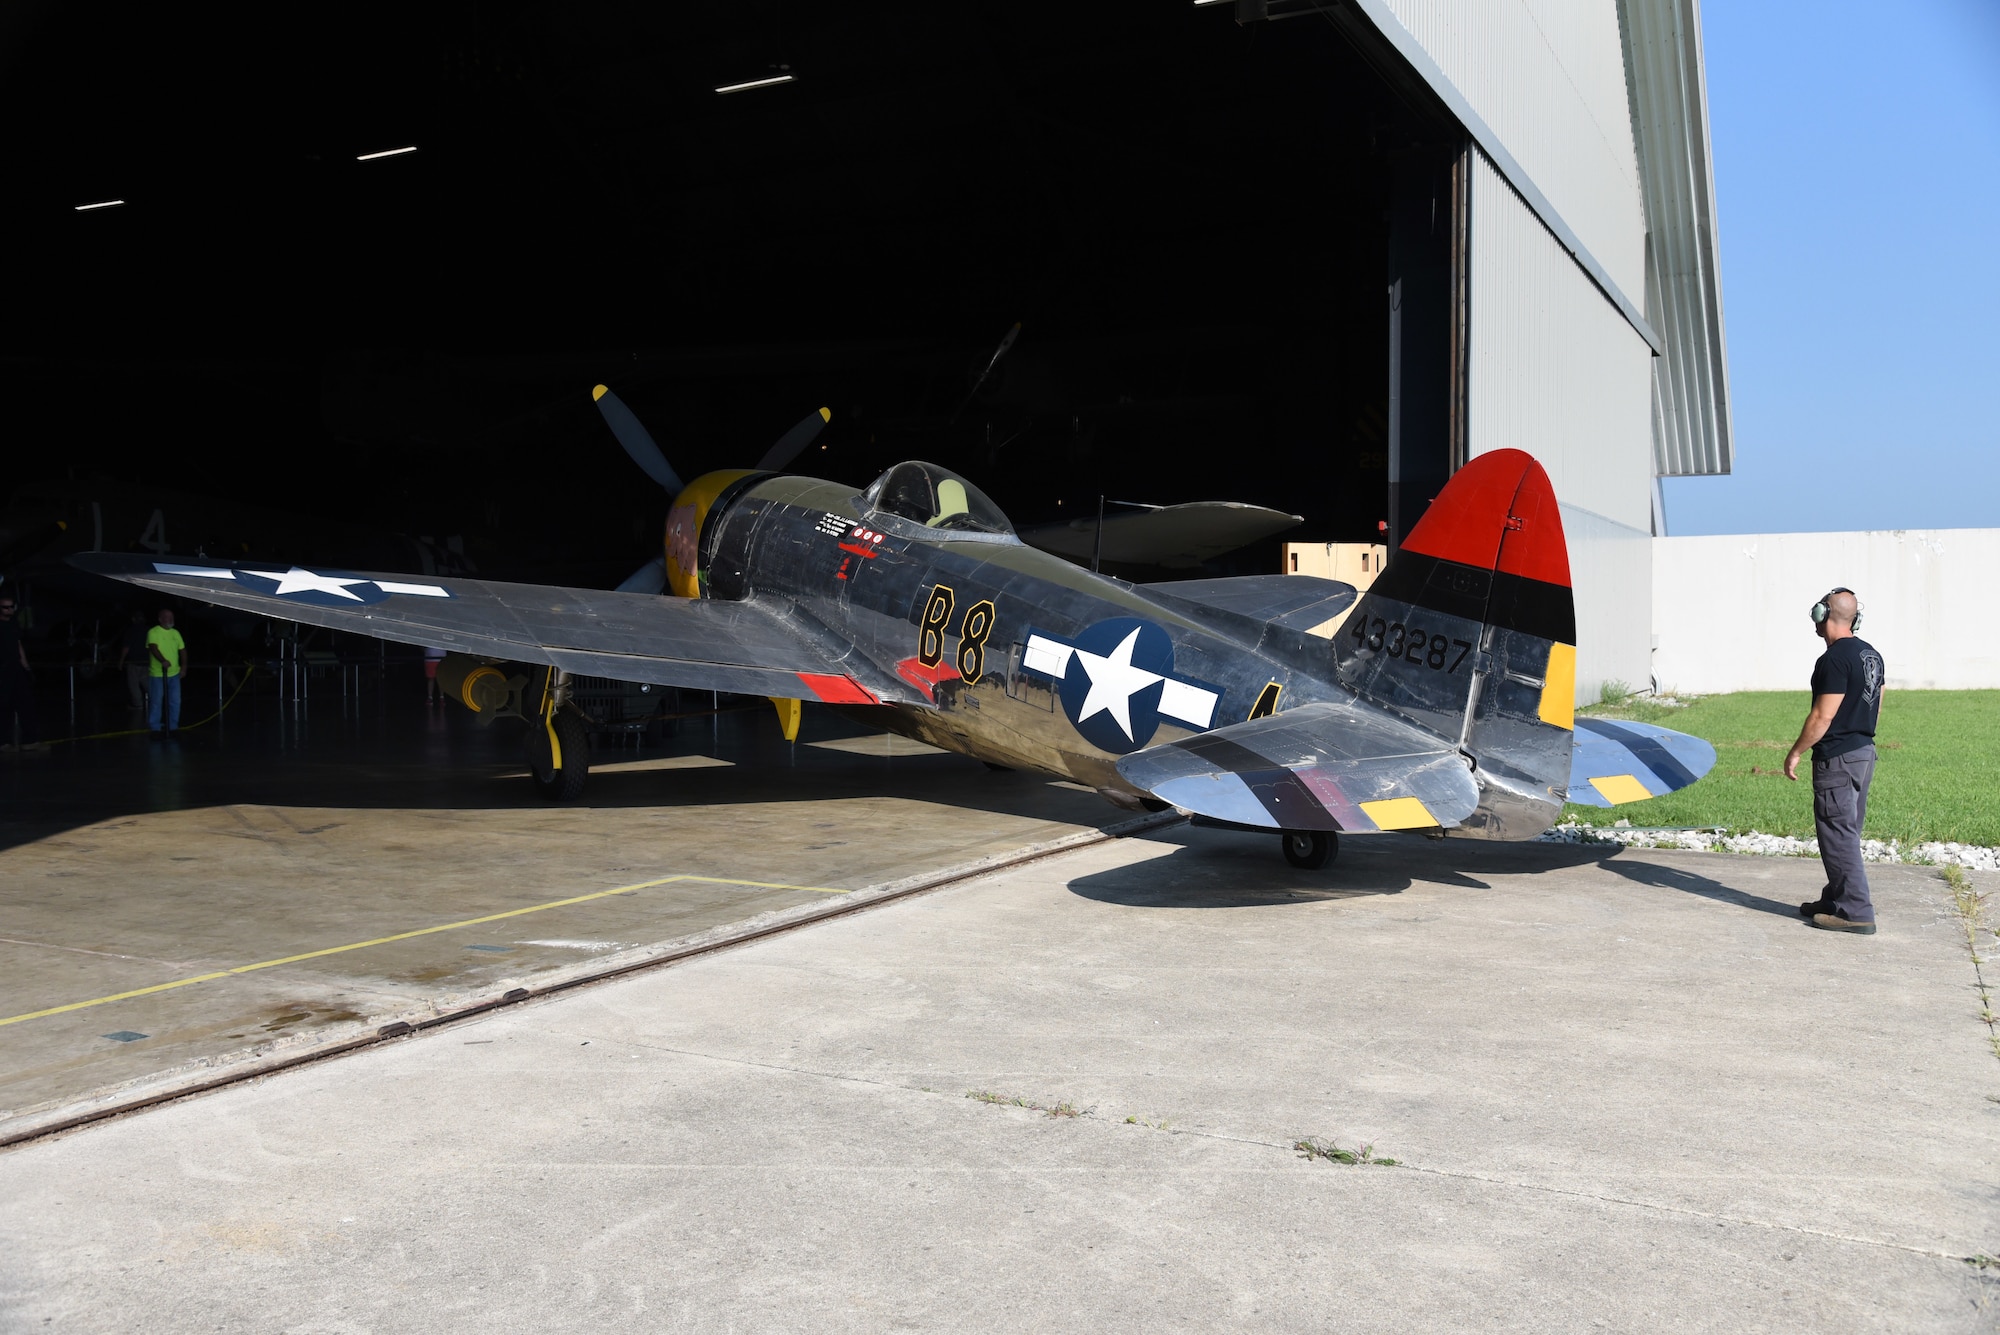 Museum restoration crews move the Republic P-47D (Bubble Canopy Version) back into the WWII Gallery at the National Museum of the U.S. Air Force on Aug. 14, 2018. Several WWII era aircraft were temporarily placed throughout the museum to provide adequate space for the Memphis Belle exhibit opening events. (U.S. Air Force photo by Ken LaRock)